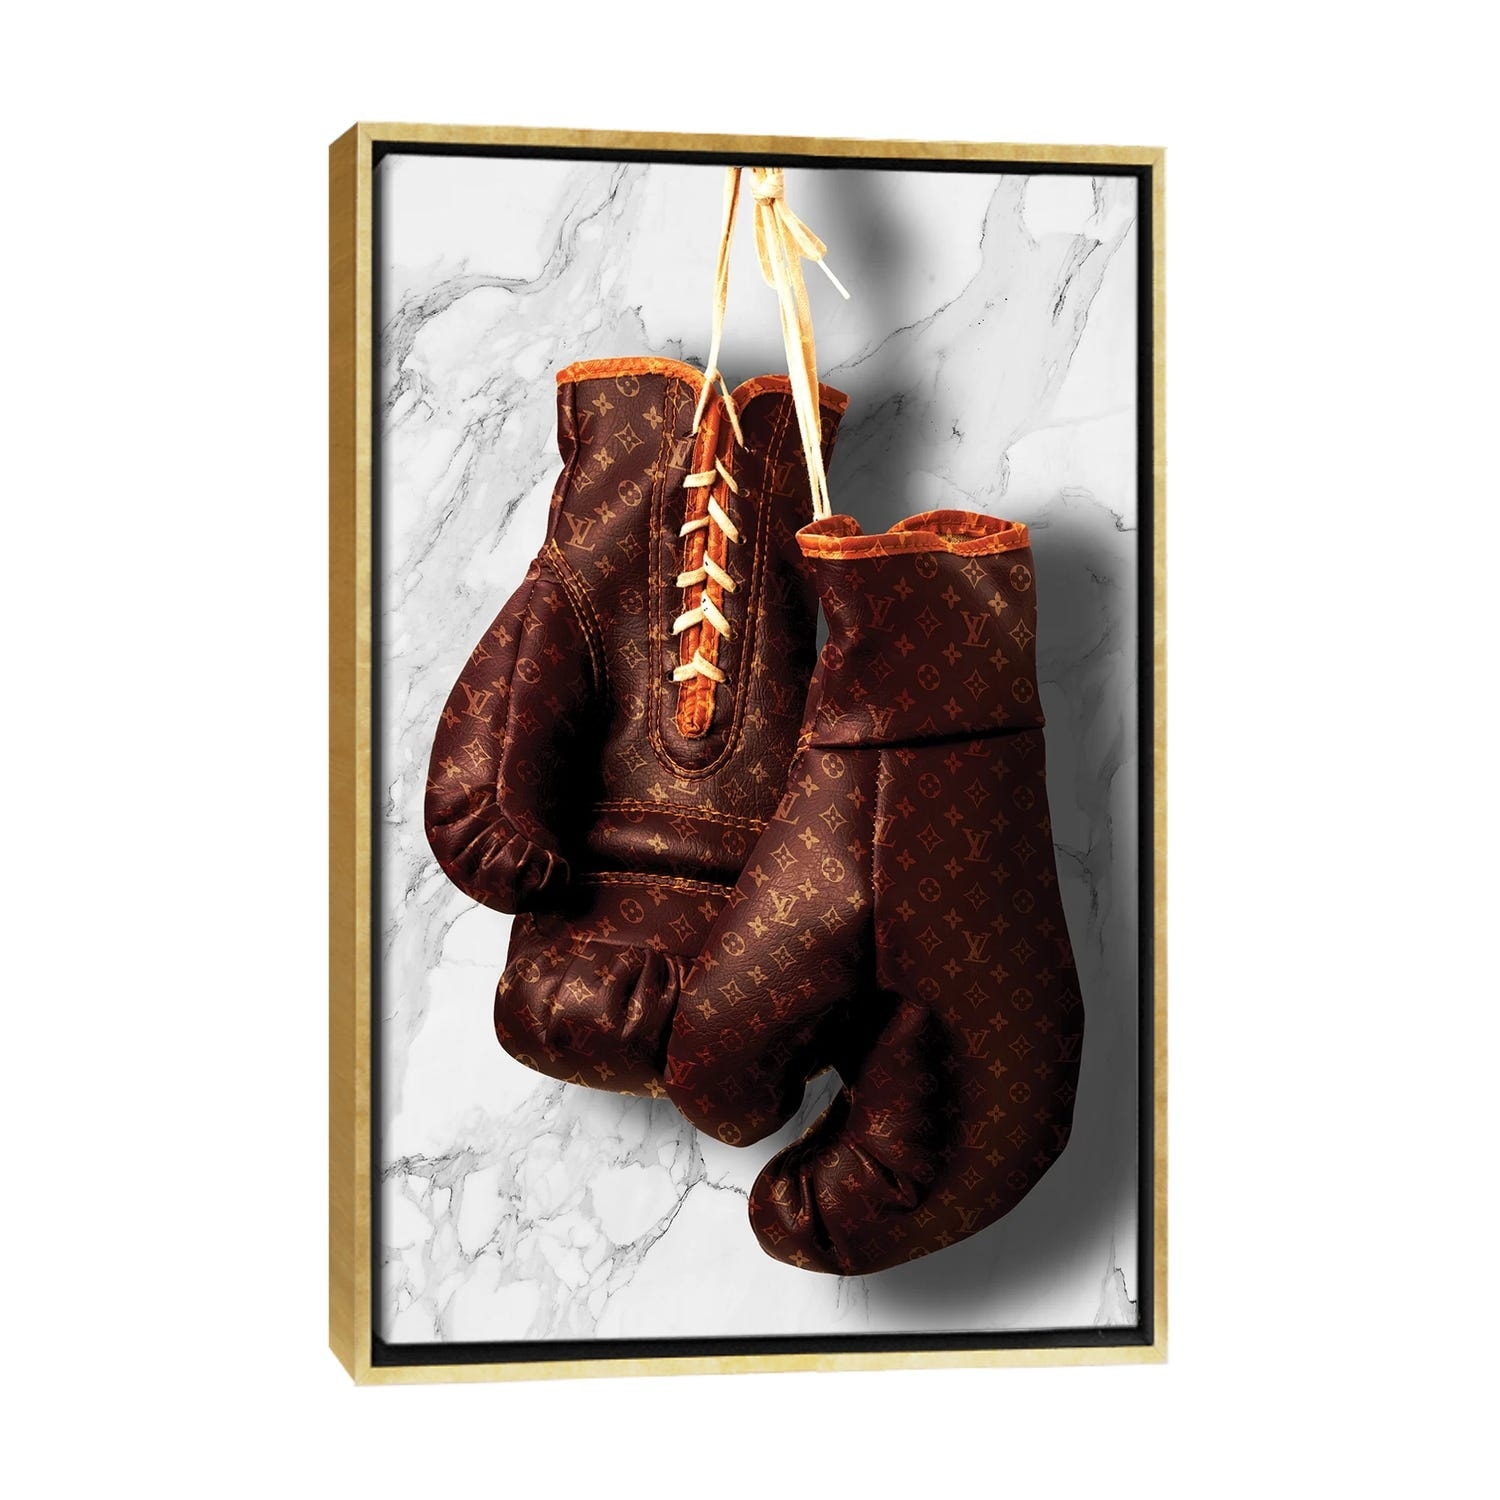 Framed Canvas Art (Gold Floating Frame) - LV Boxing by Alexandre Venancio ( Sports > Boxing art) - 26x18 in